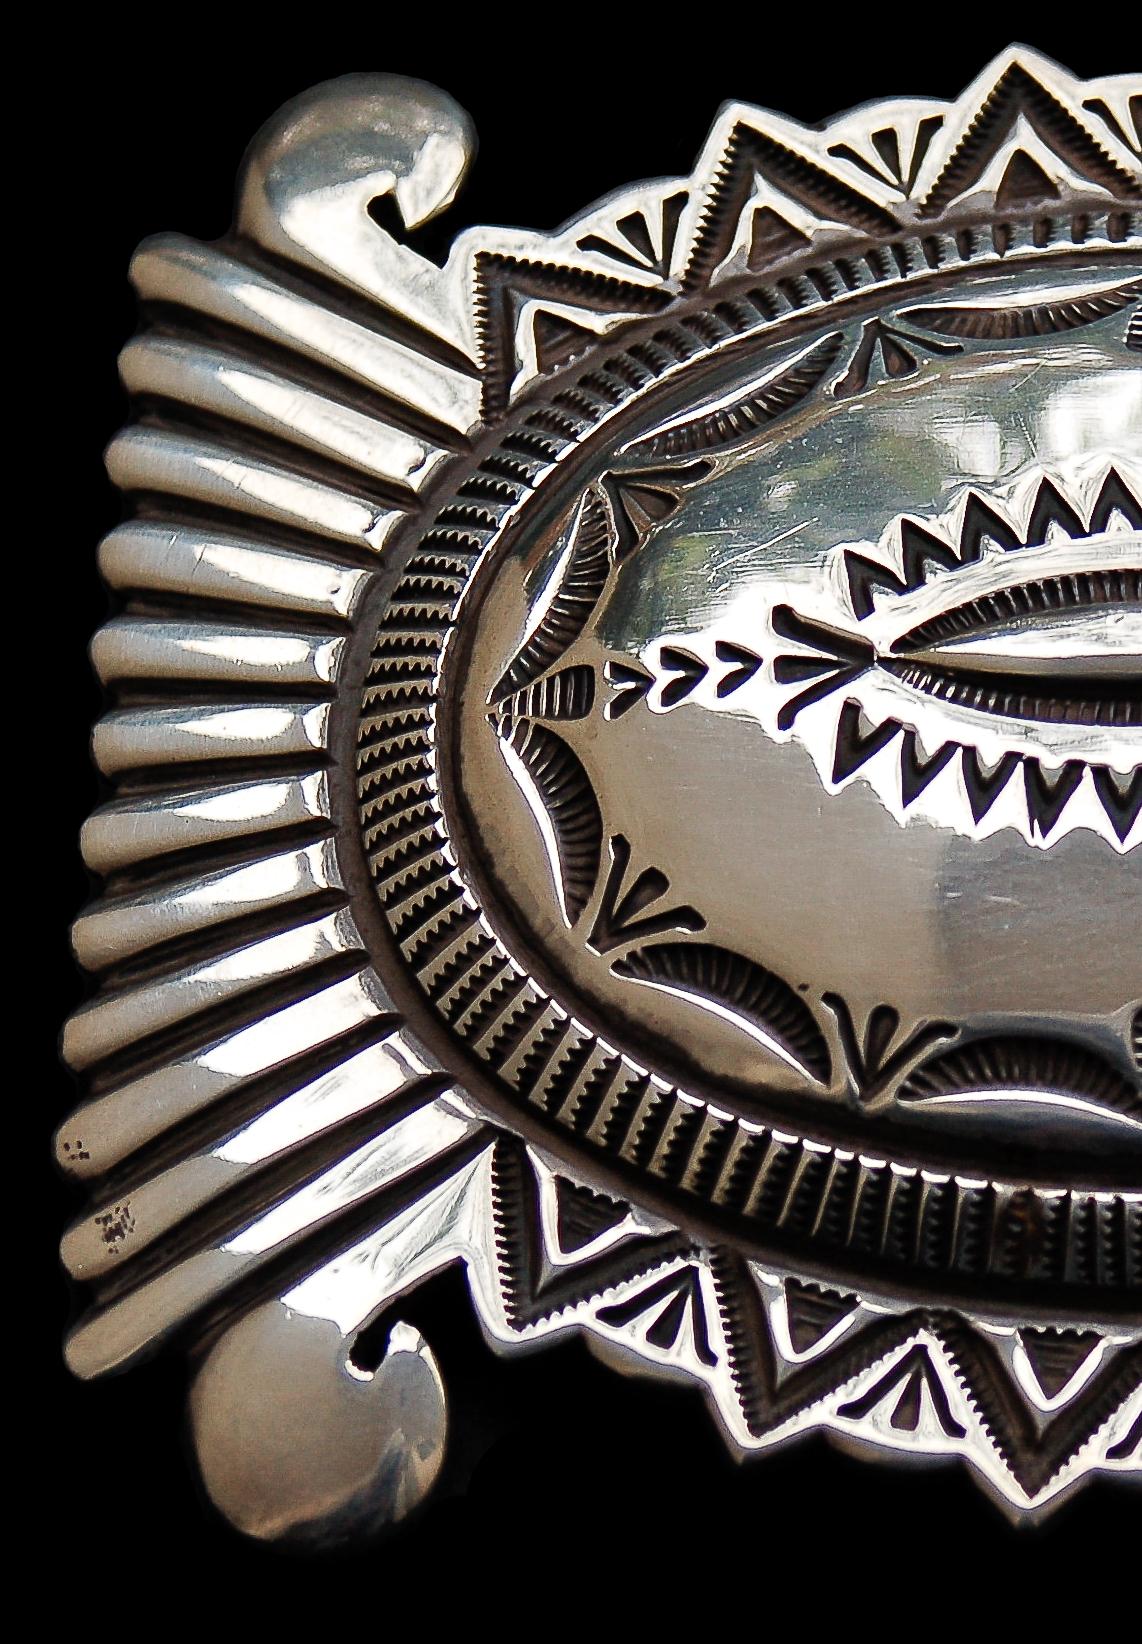 This outstanding belt buckle of heavy sterling silver exhibits all the beautifully detailed stamp work that has become a hallmark of master Navajo Silversmith Wilson Jim's work. 

Signed, 